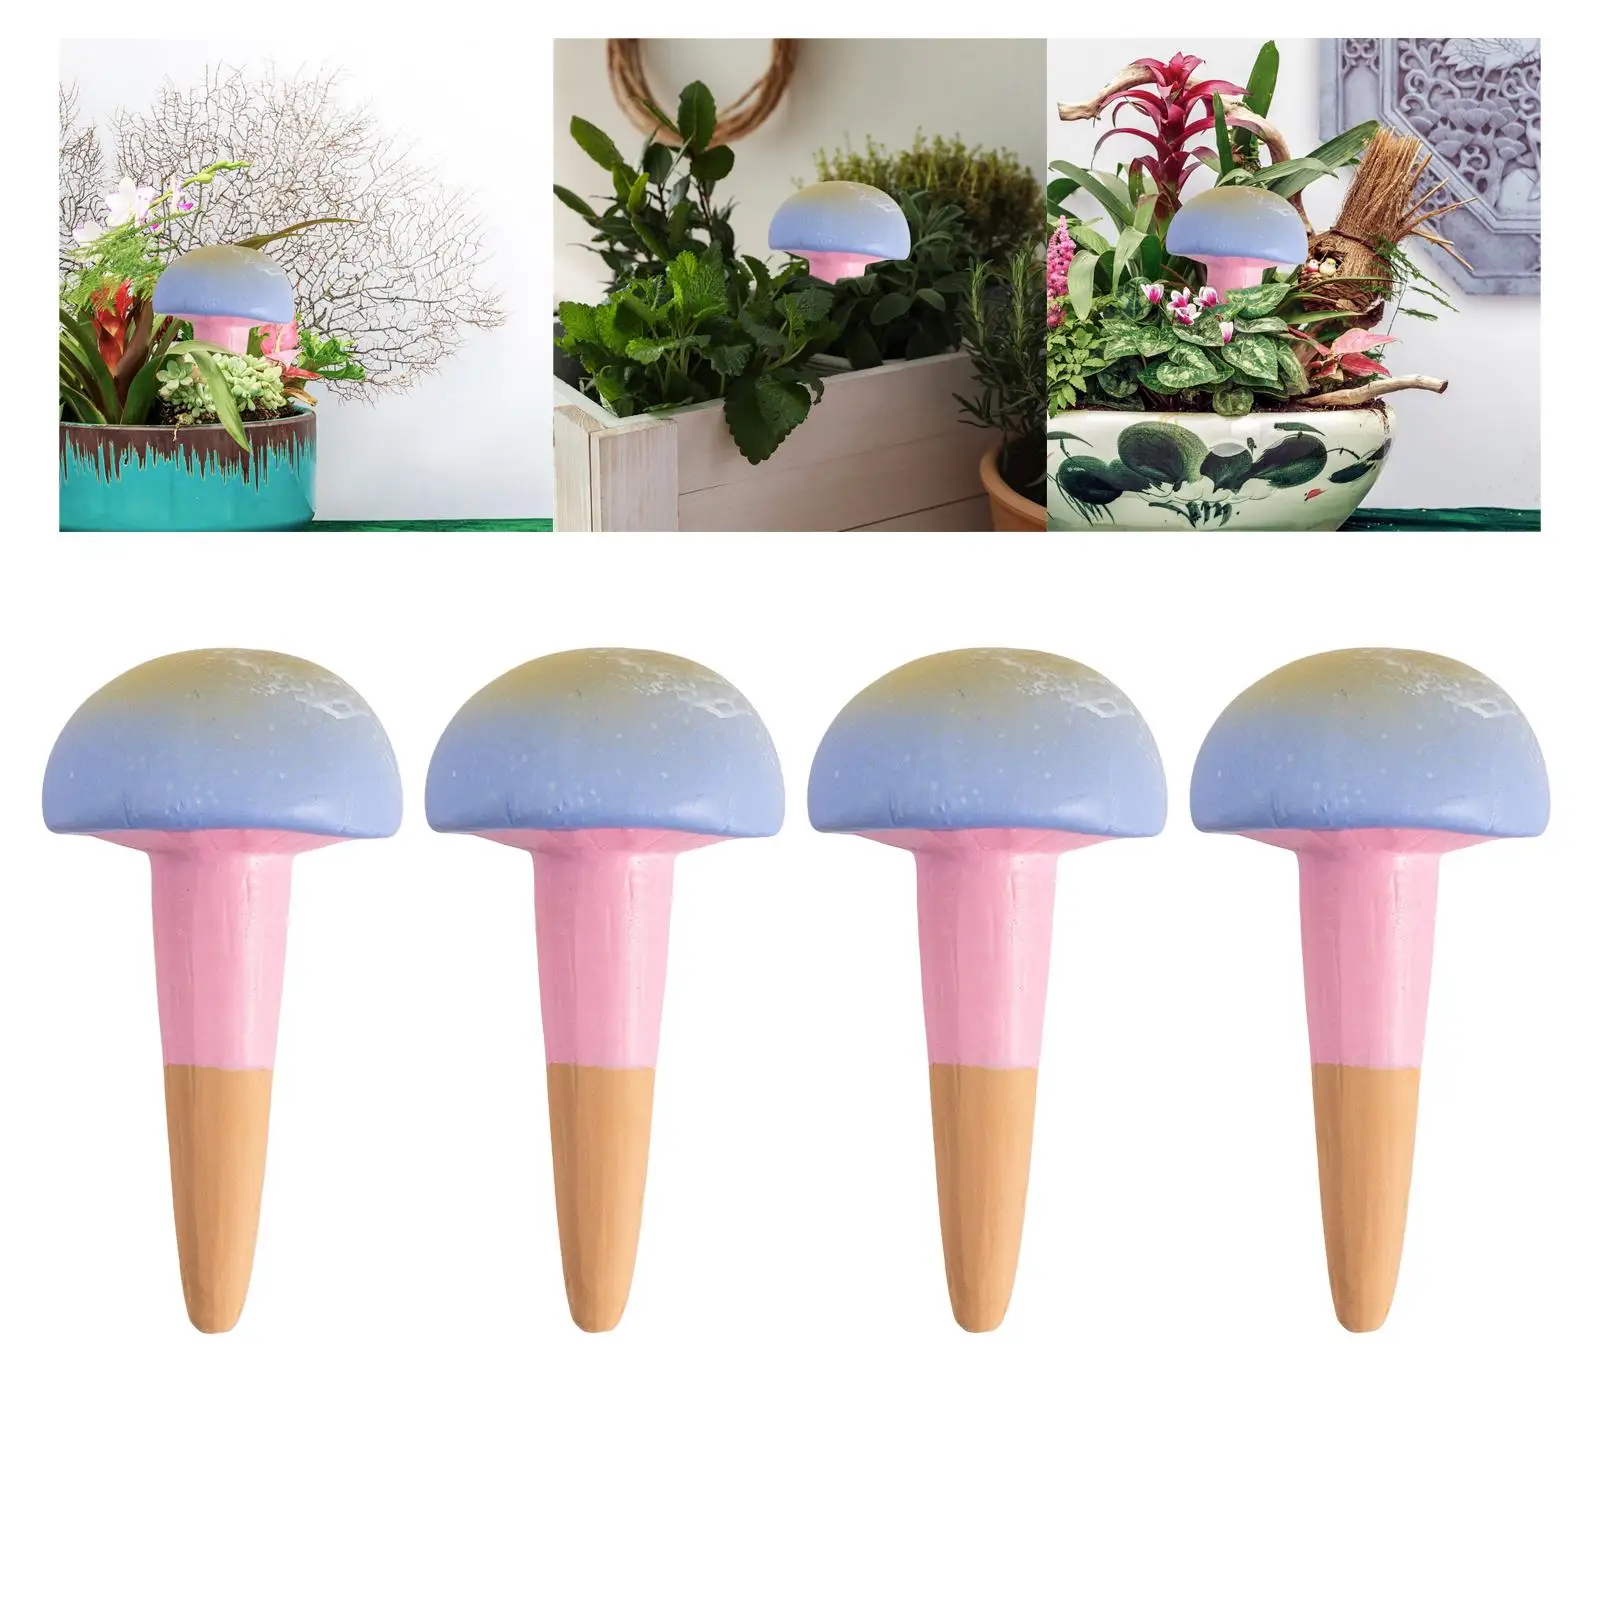 4Pcs Automatic Drip Irrigation System, Flowerpots Watering Stake Decorative, Use When on Vacation, Automatic Watering System